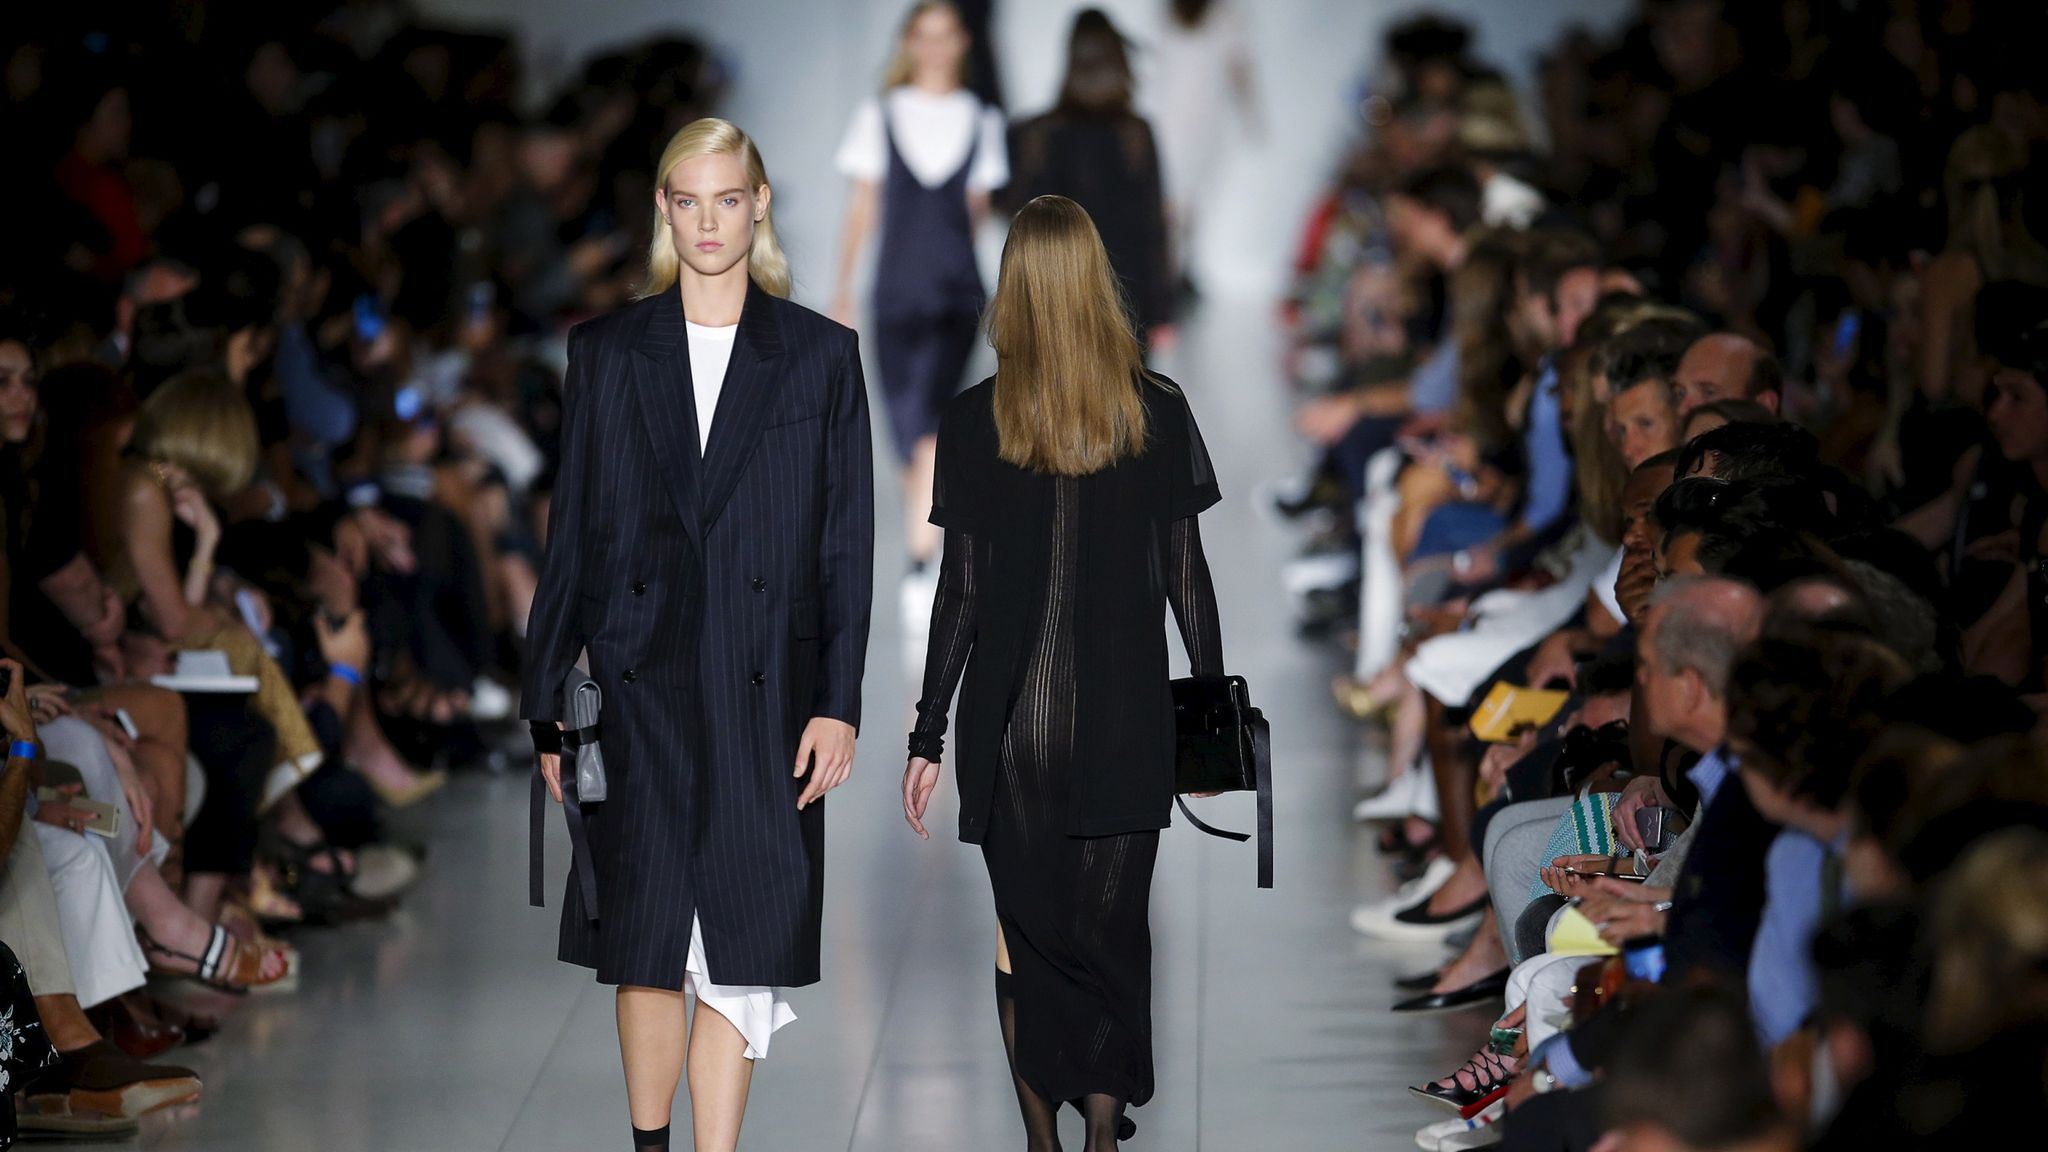 Louis Vuitton owner LVMH is to sell DKNY for $650m